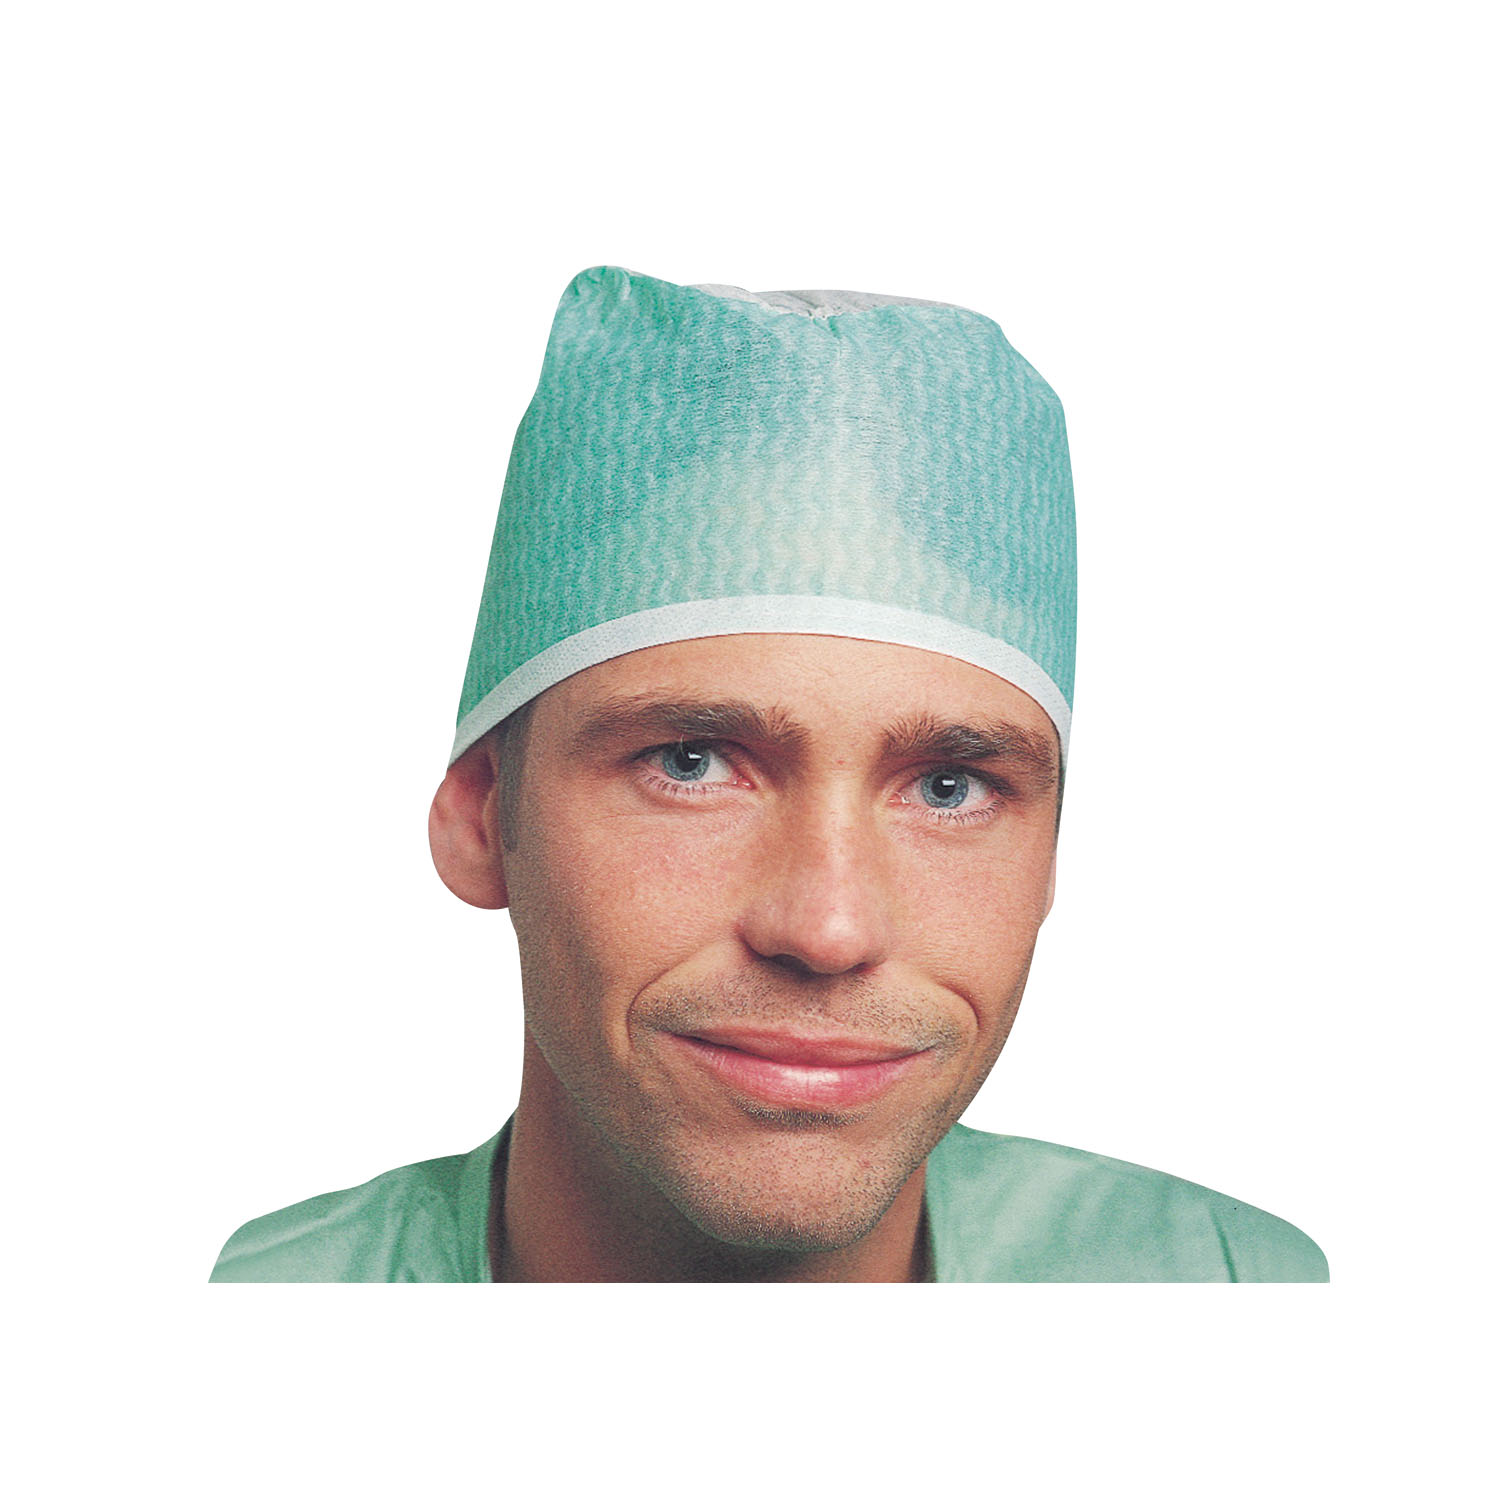 MOLNLYCKE BARRIER SURGICAL CAP : 621301 CS $134.00 Stocked